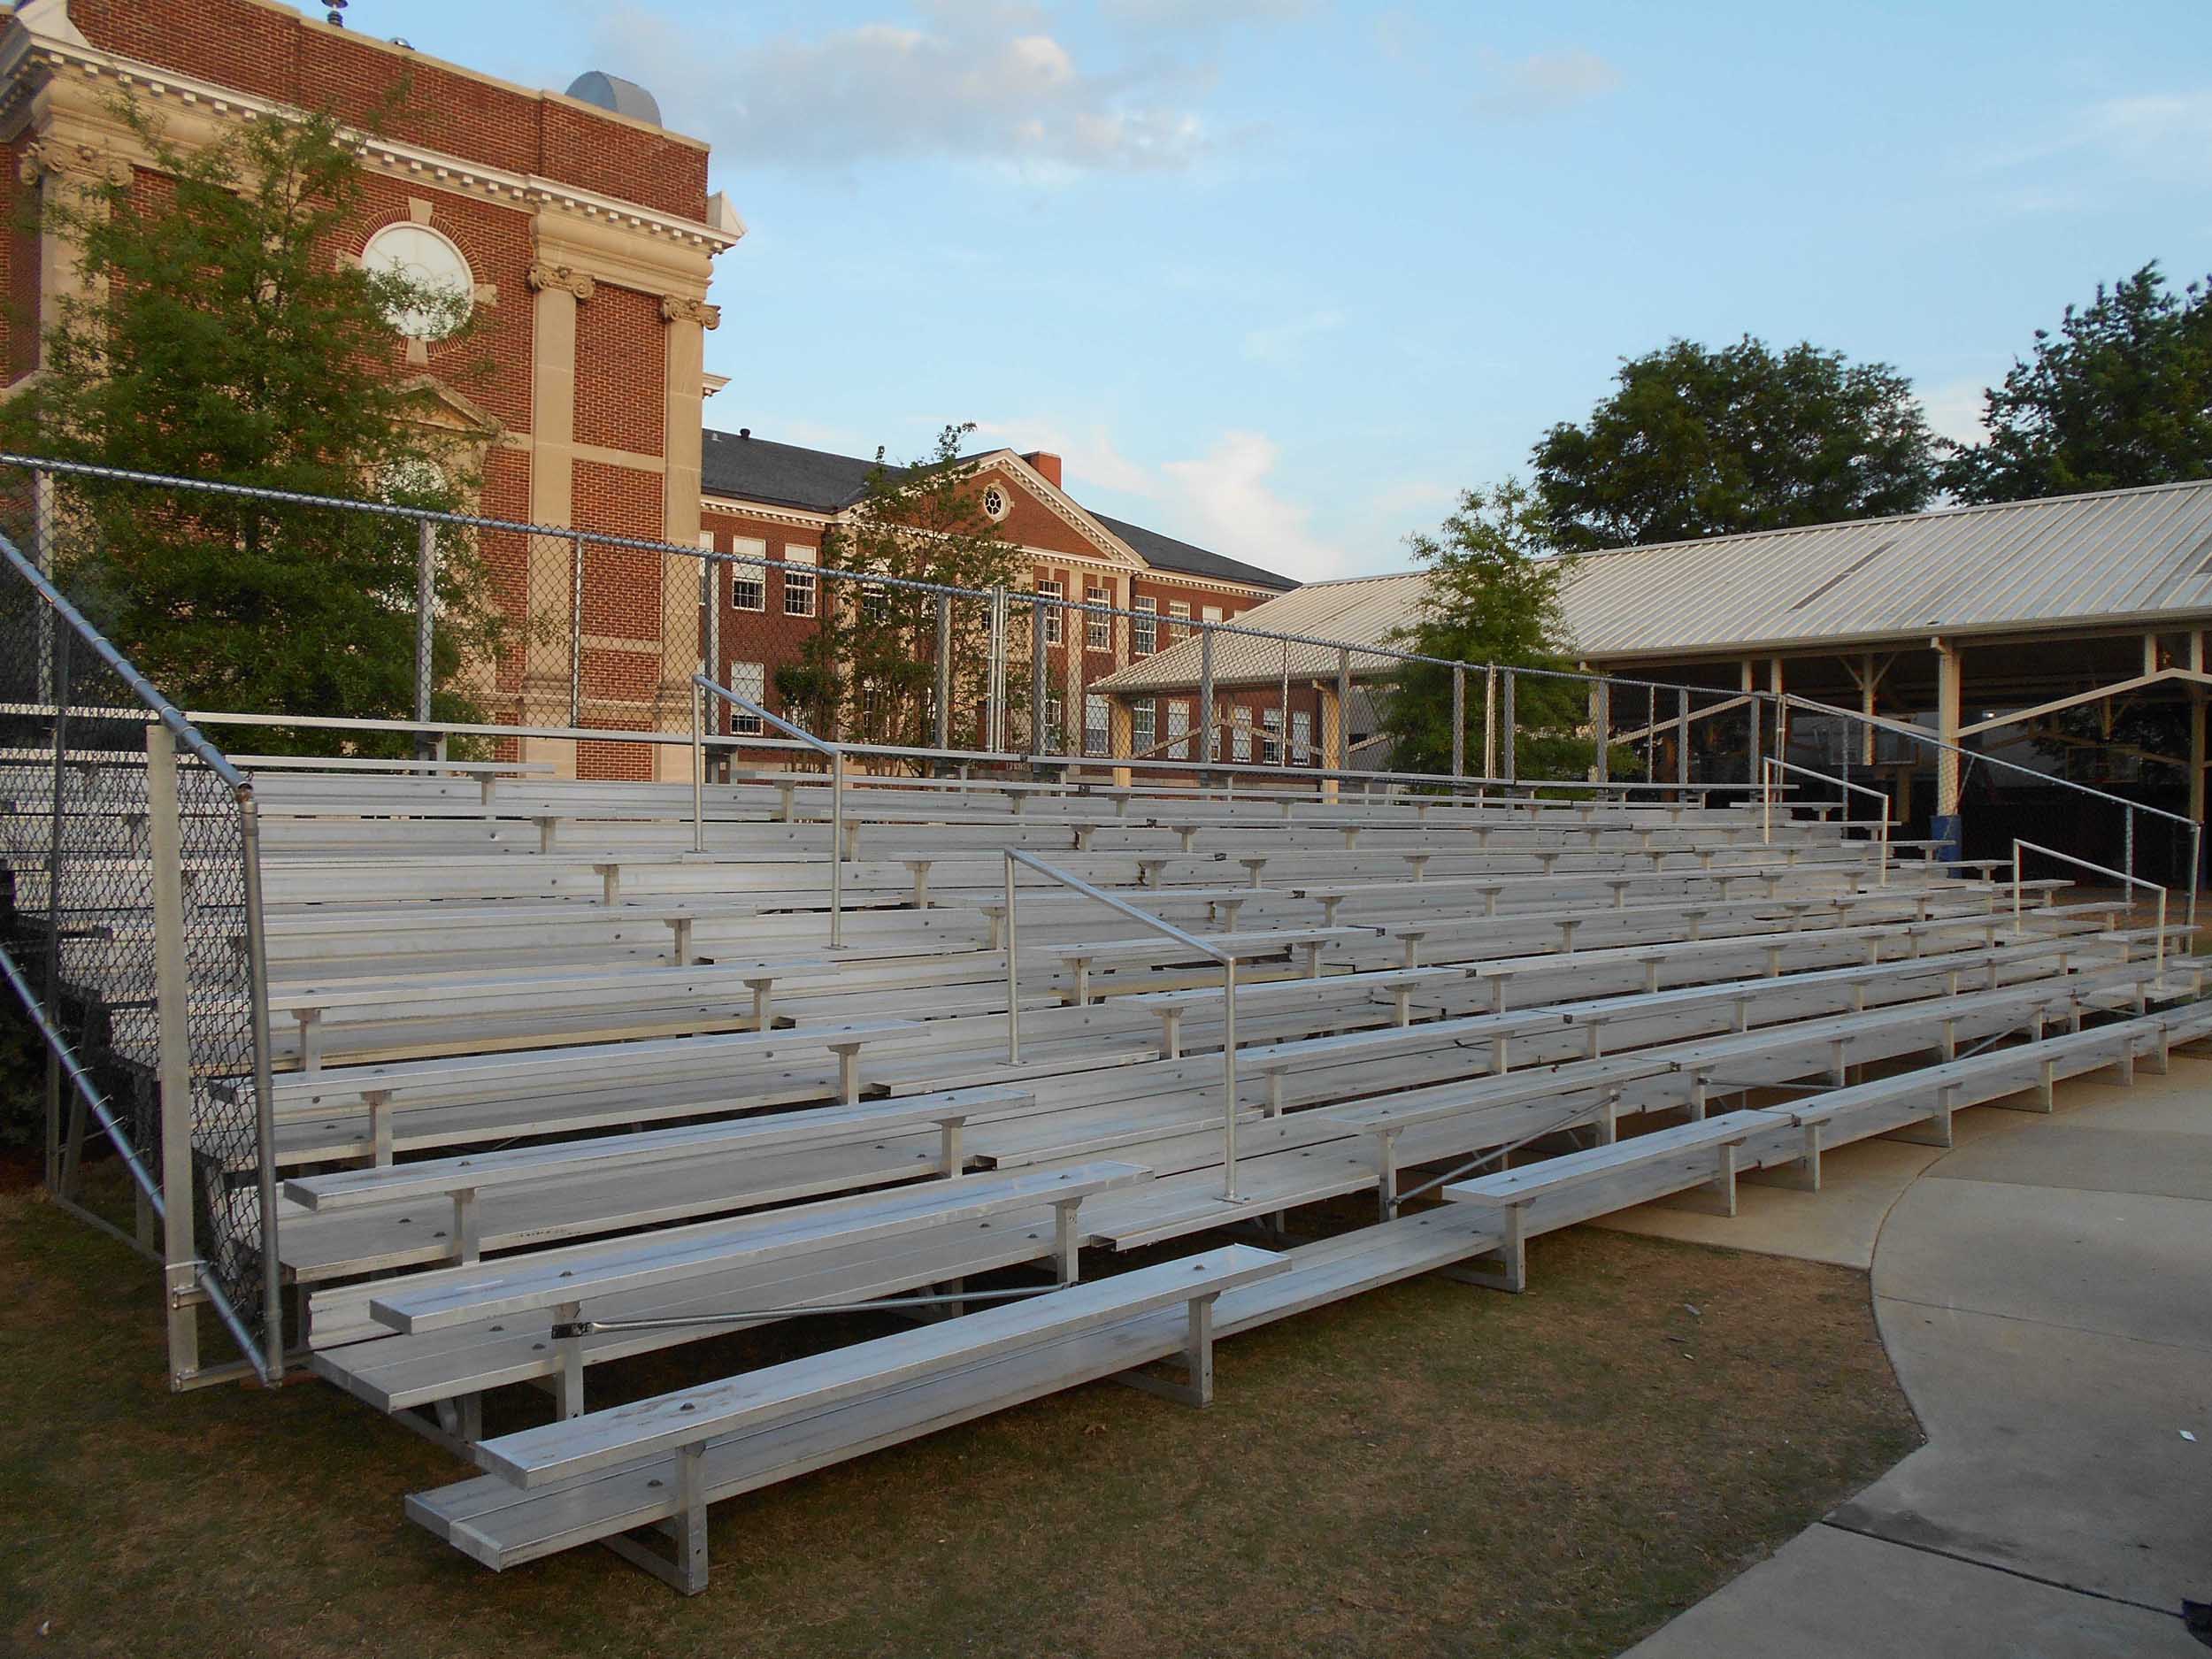 New and Used Aluminum Bleachers for Sale